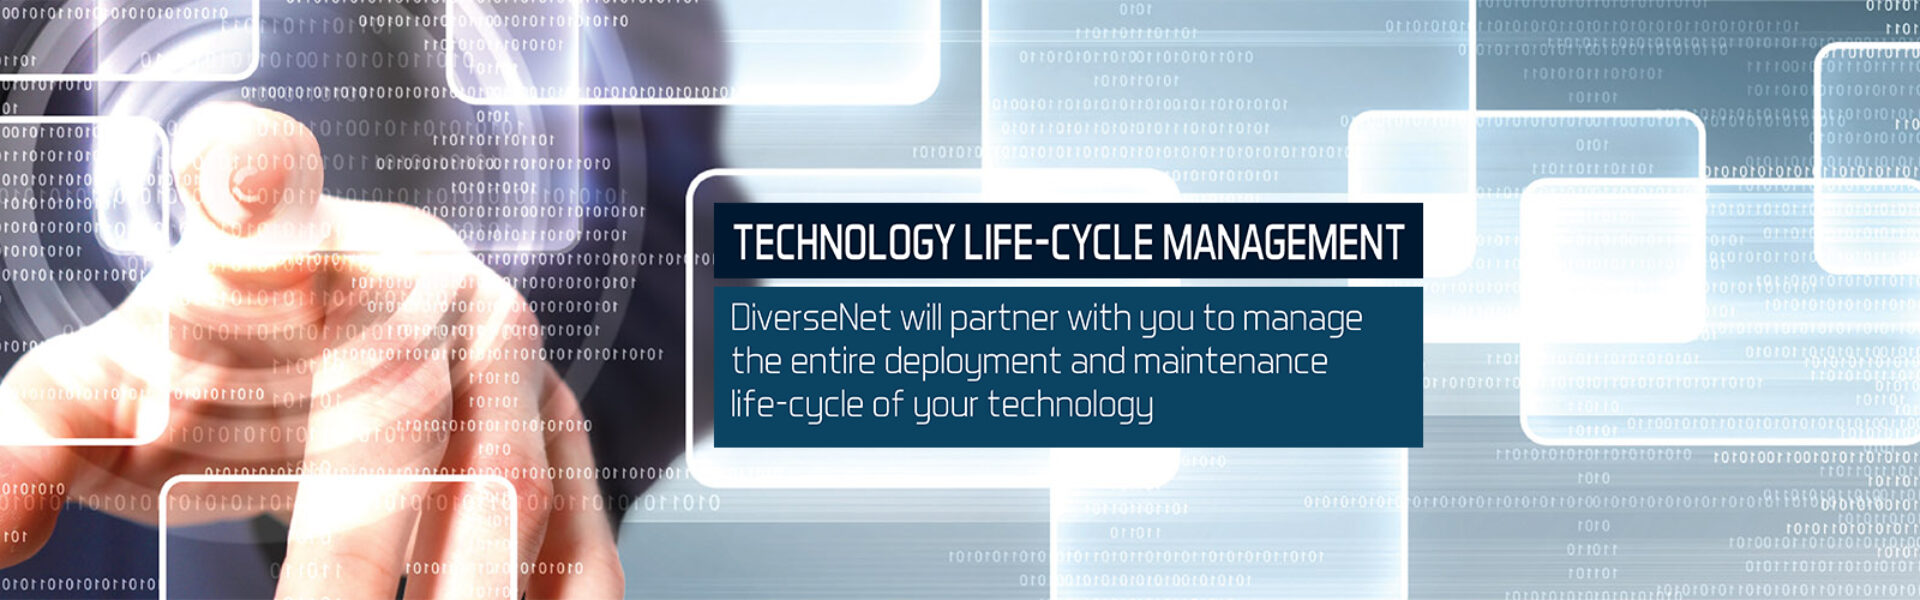 Technology Life-Cycle Management